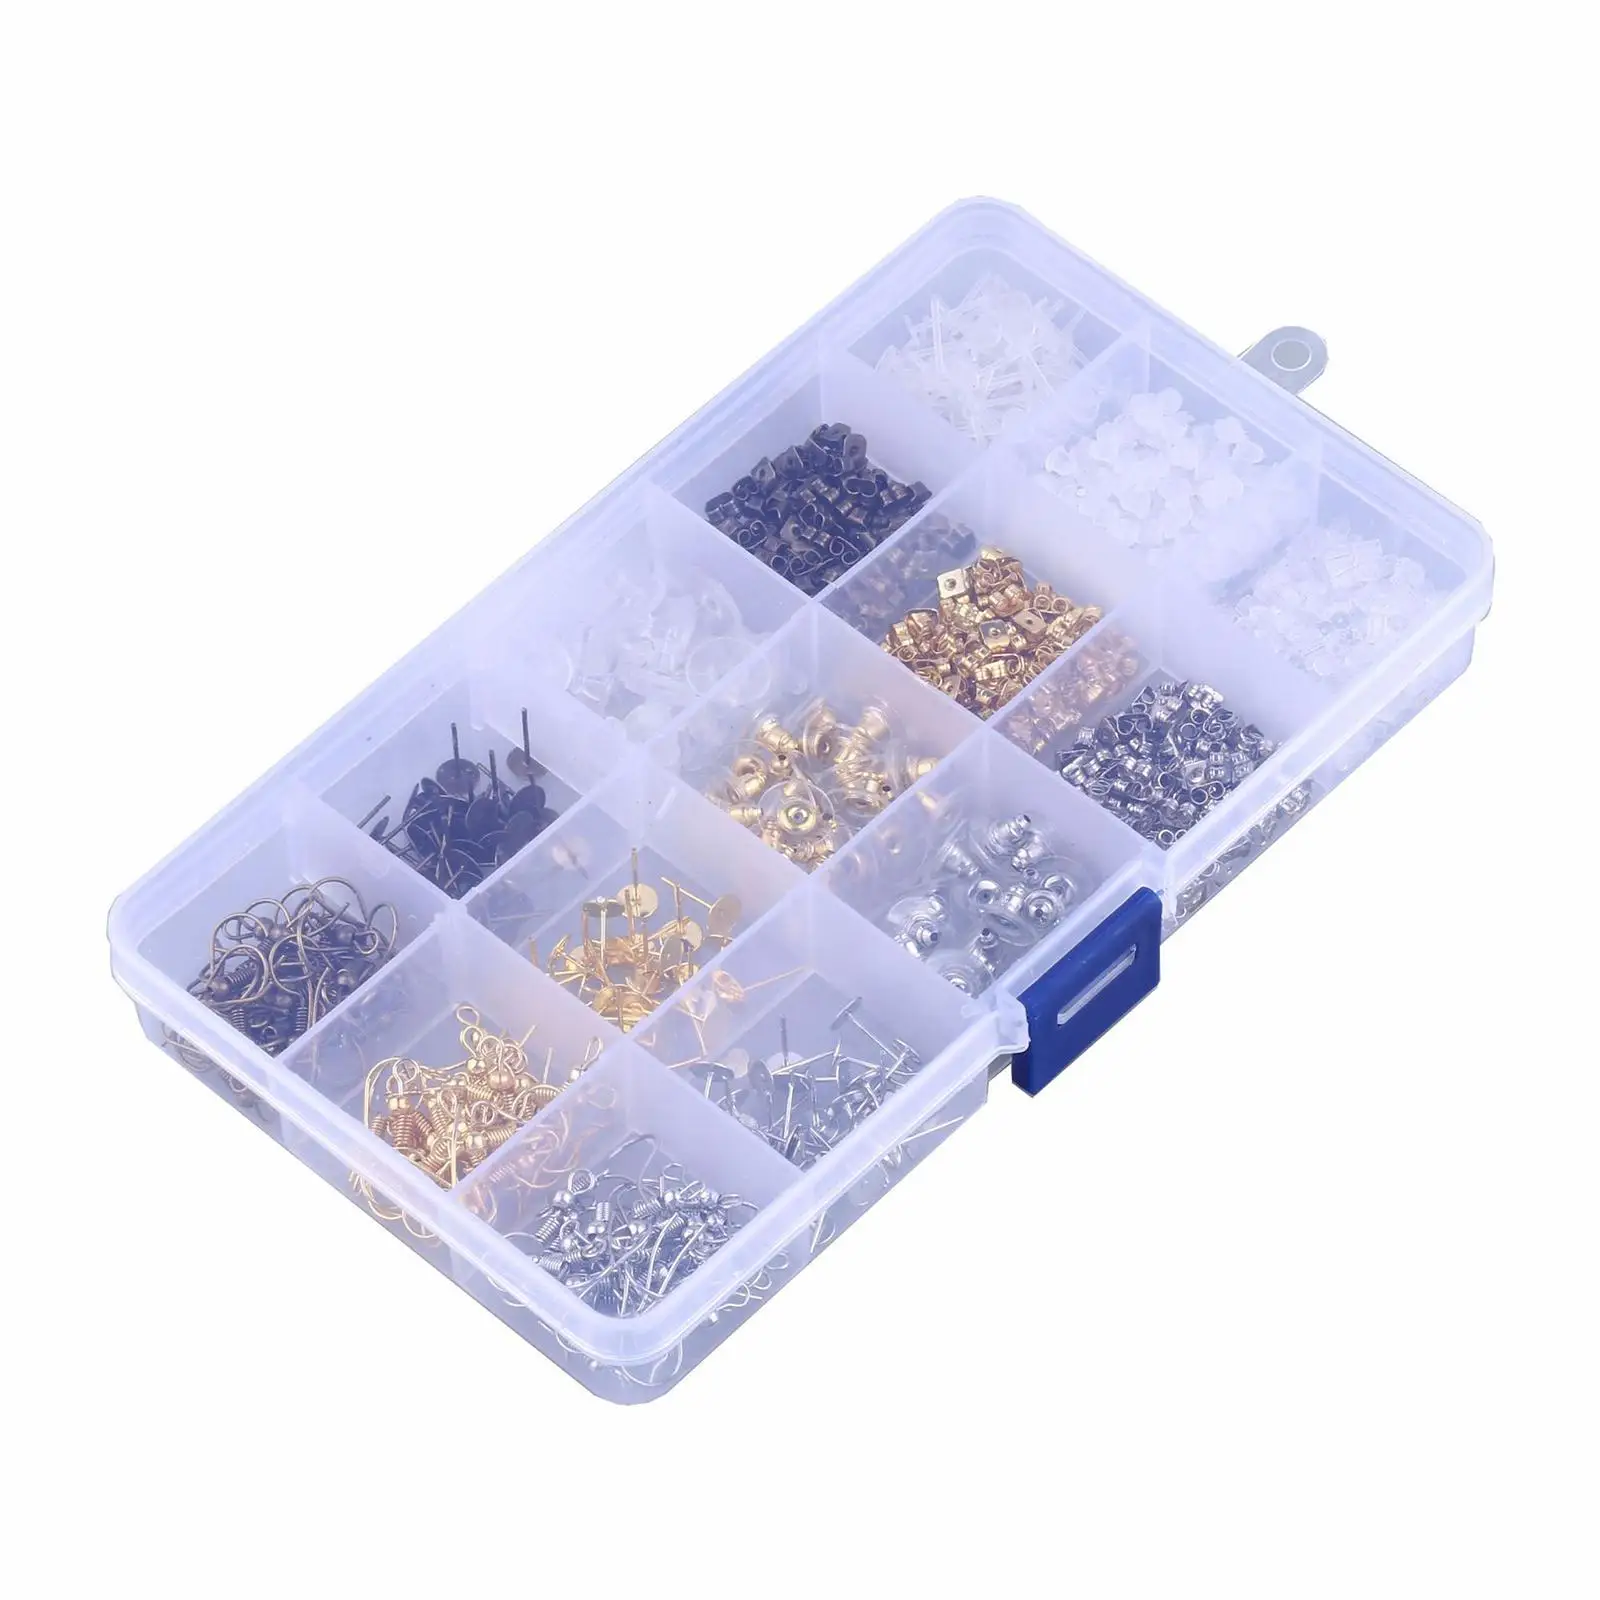 Earring Making Supplies Kit Earring Posts Earring Backs Stoppers for Jewelry Making Findings